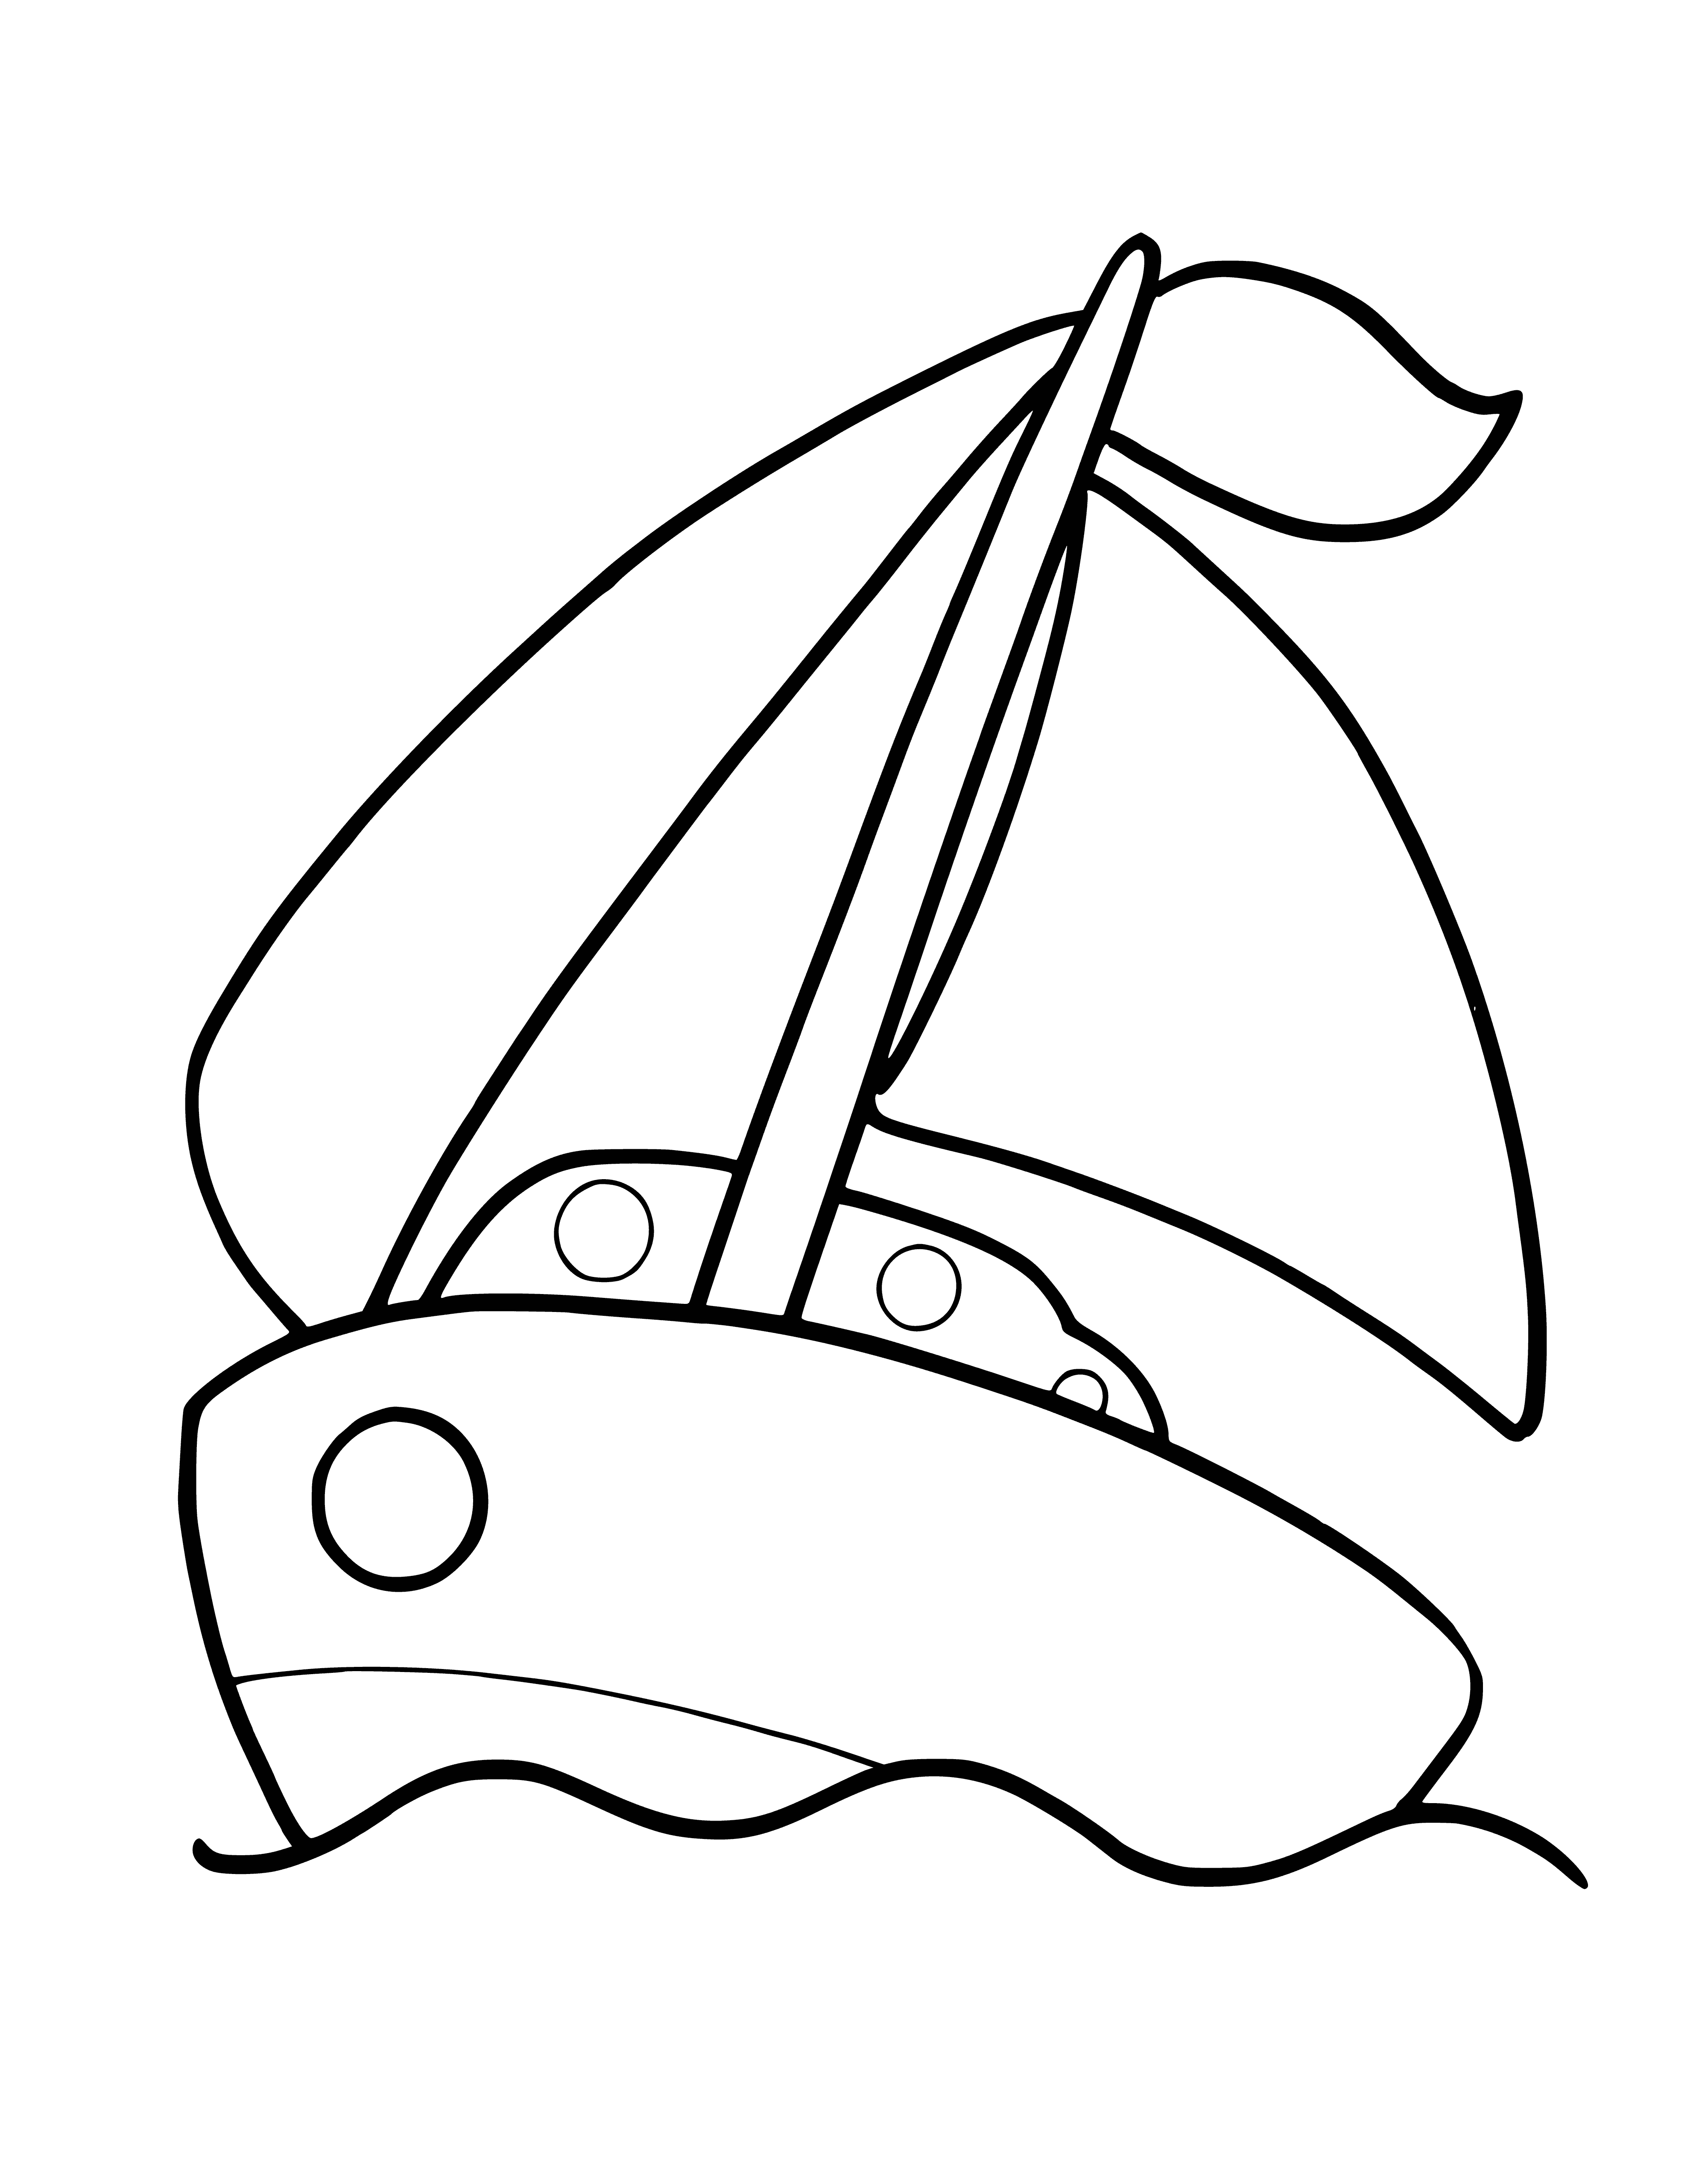 coloring page: A black & white ship with levels, stairs, windows, sails & flags. A perfect coloring escape! #coloringpage #CGSignature